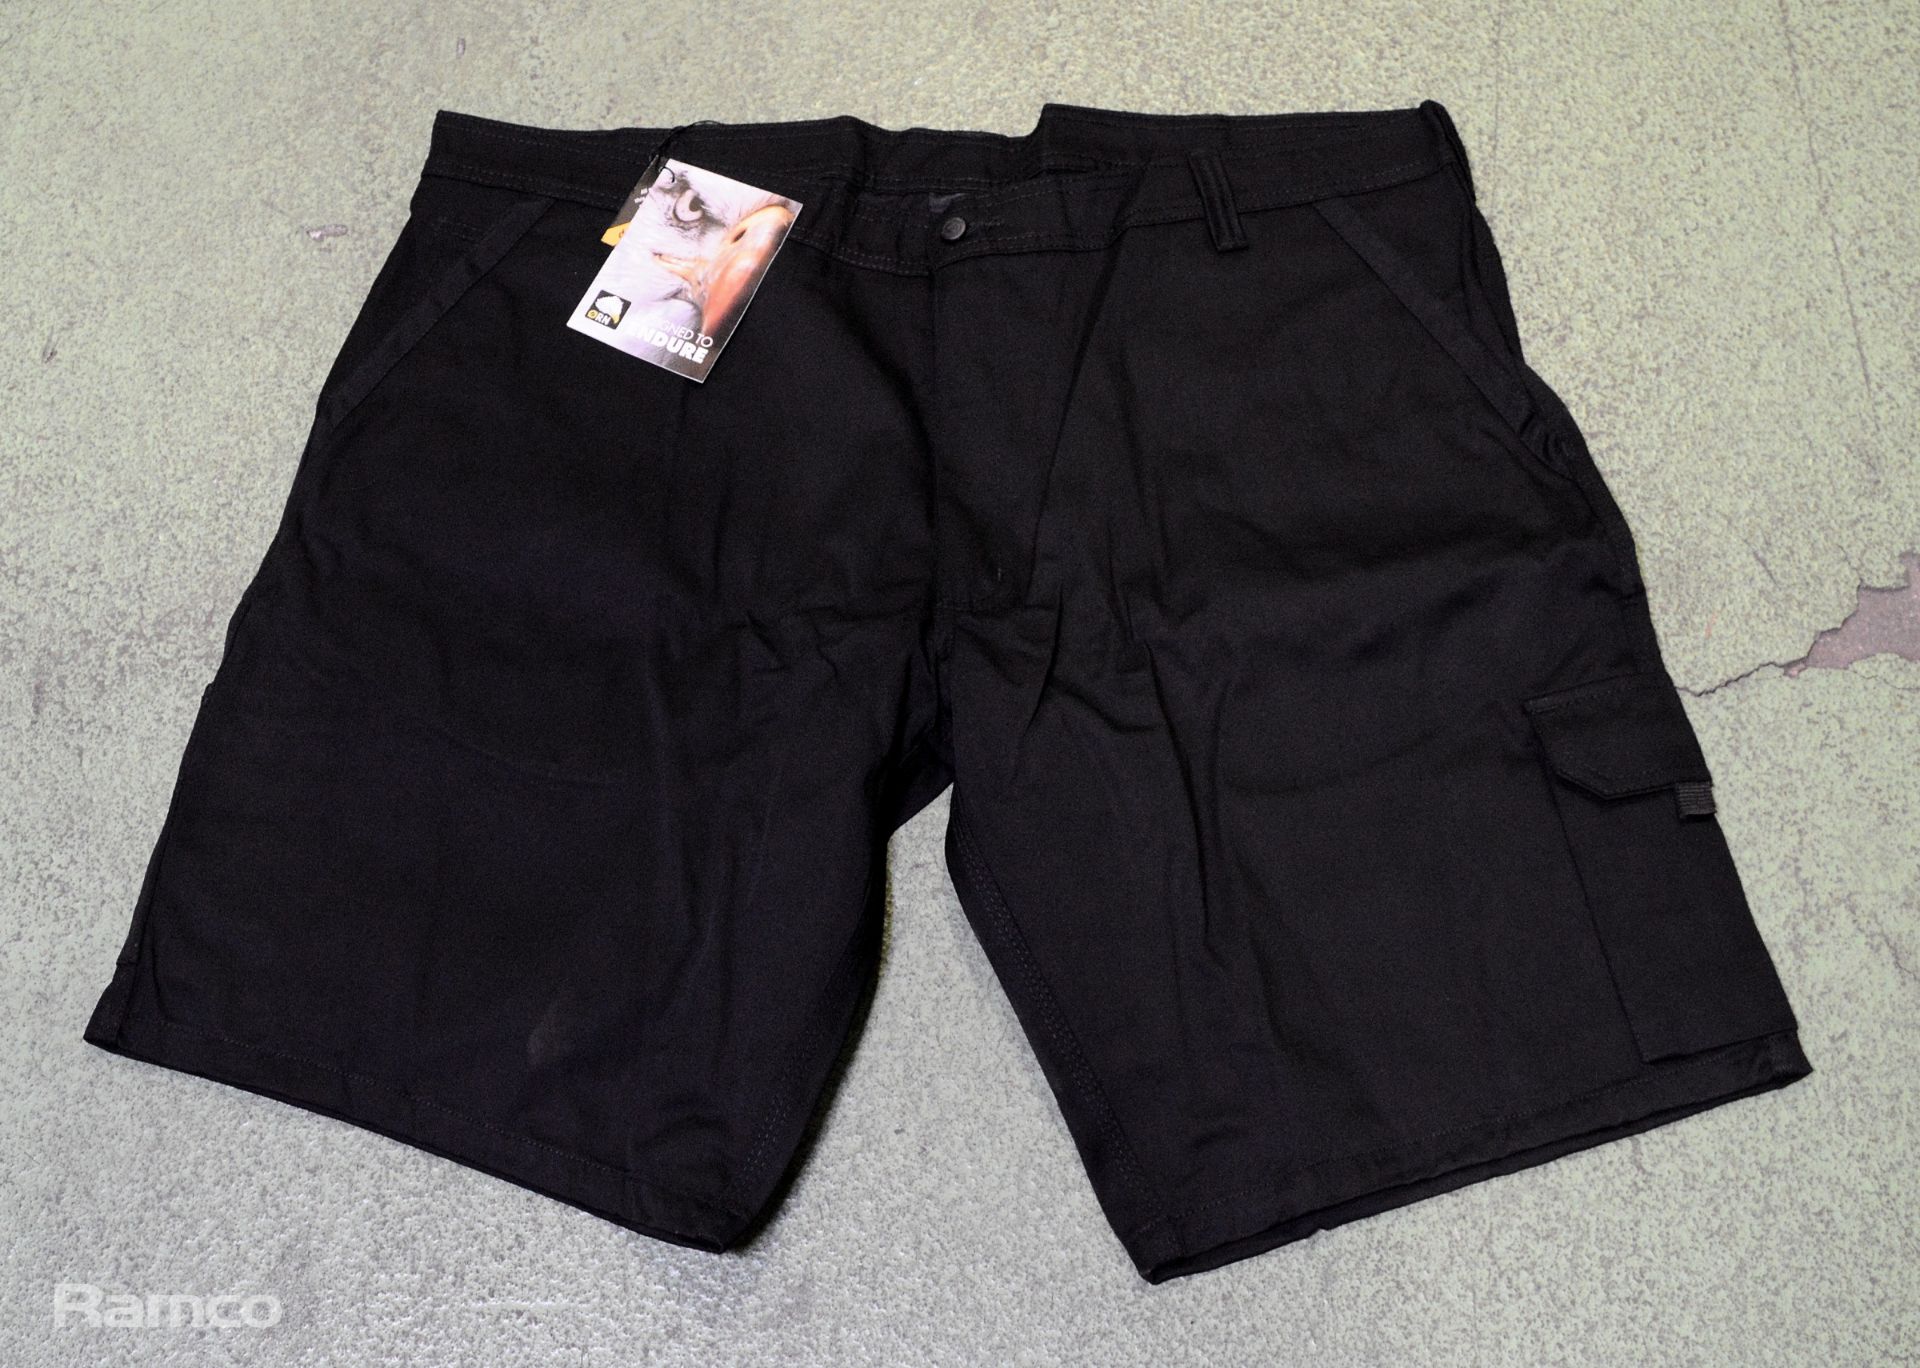 9 pairs of ORN combat shorts - 48 inch waist - Image 3 of 4